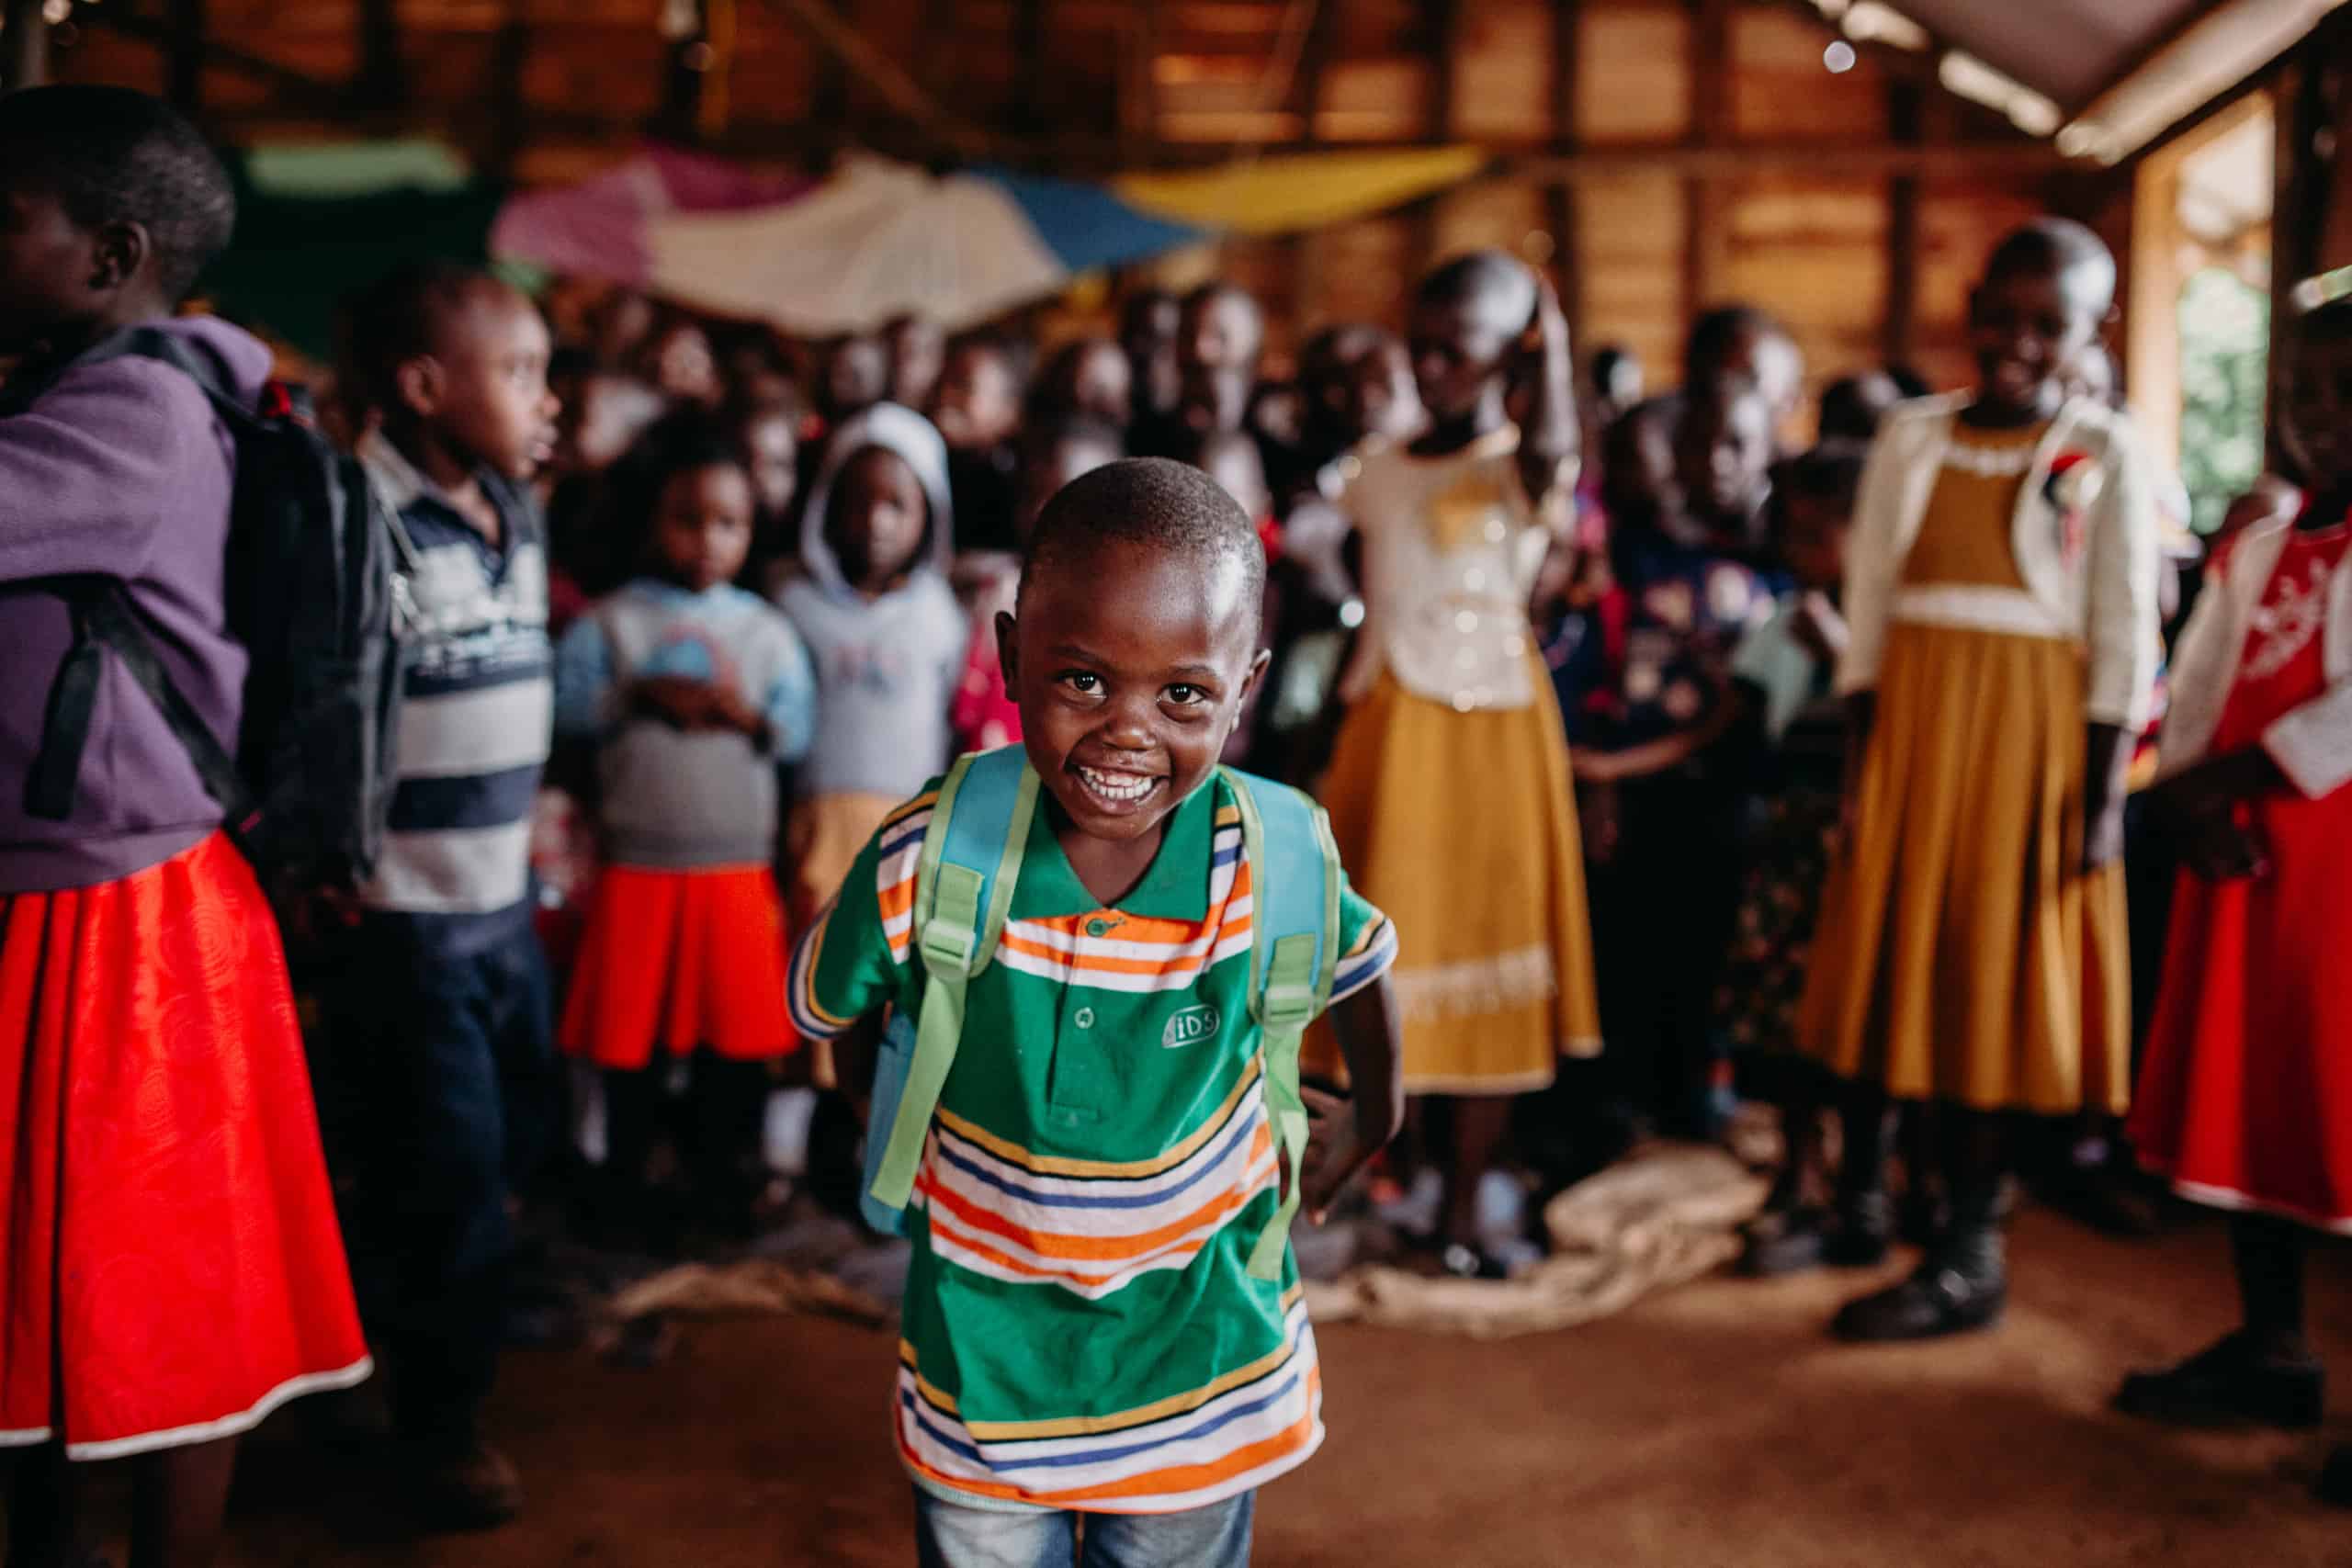 A young boy smiles while wearing a new backpack he got at a Compassion Christmas celebration. Children are standing behind him